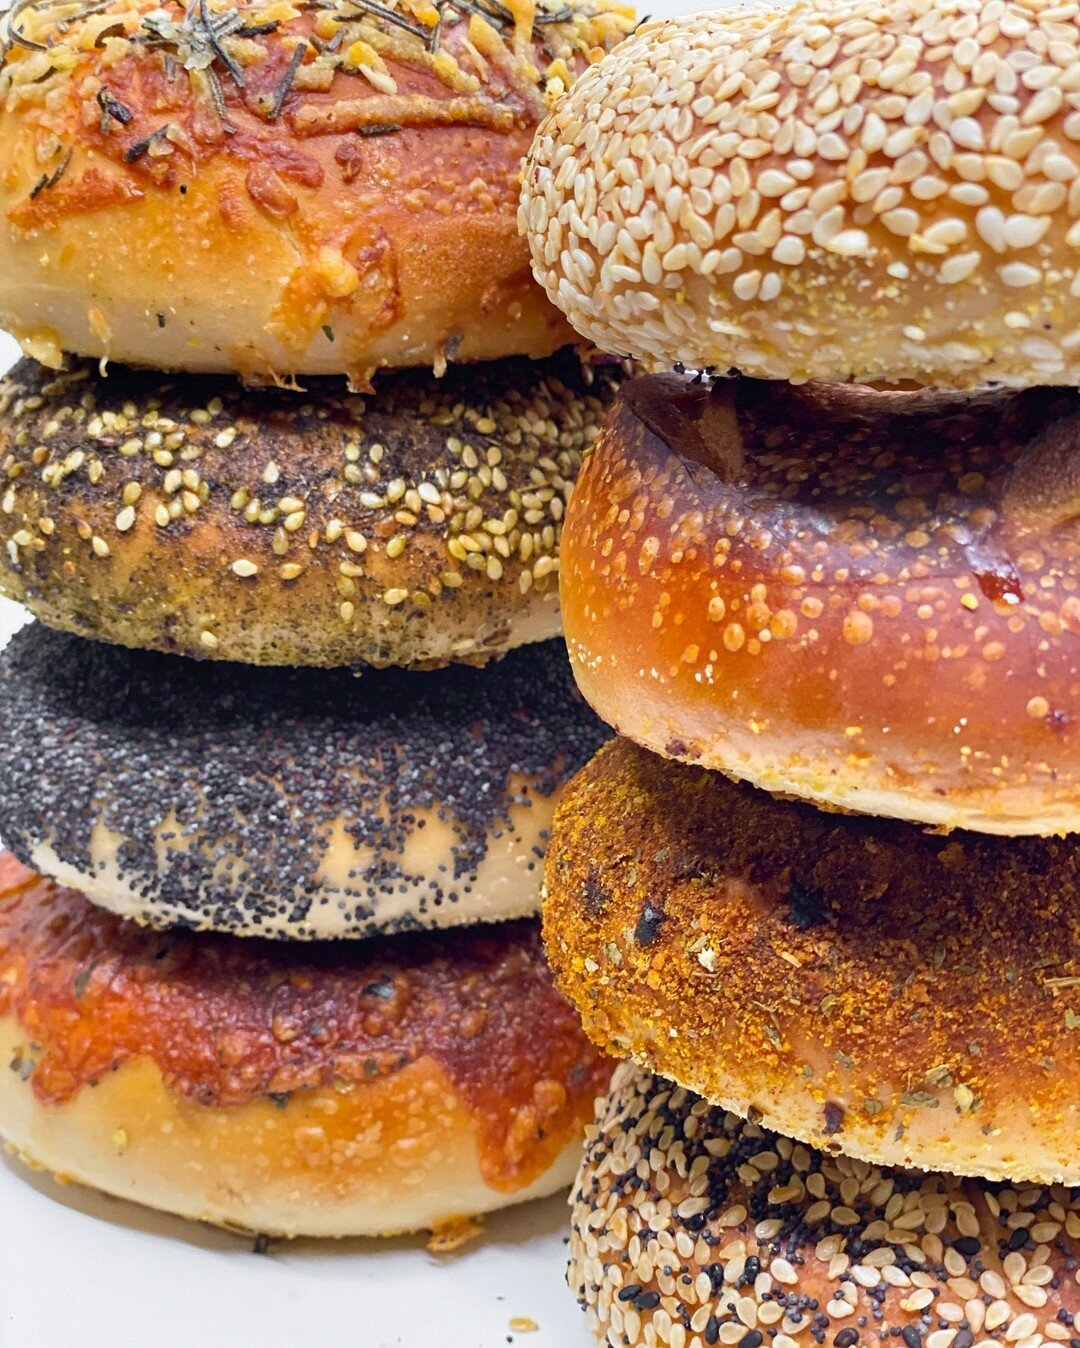 The ultimate dense and chewy Buka bagel. Fluffy yes, but not too fluffy&mdash;they are more like New York-style than Montreal, but different. We call them Sauga-Style Bagels. They are delicious and full of flavour.